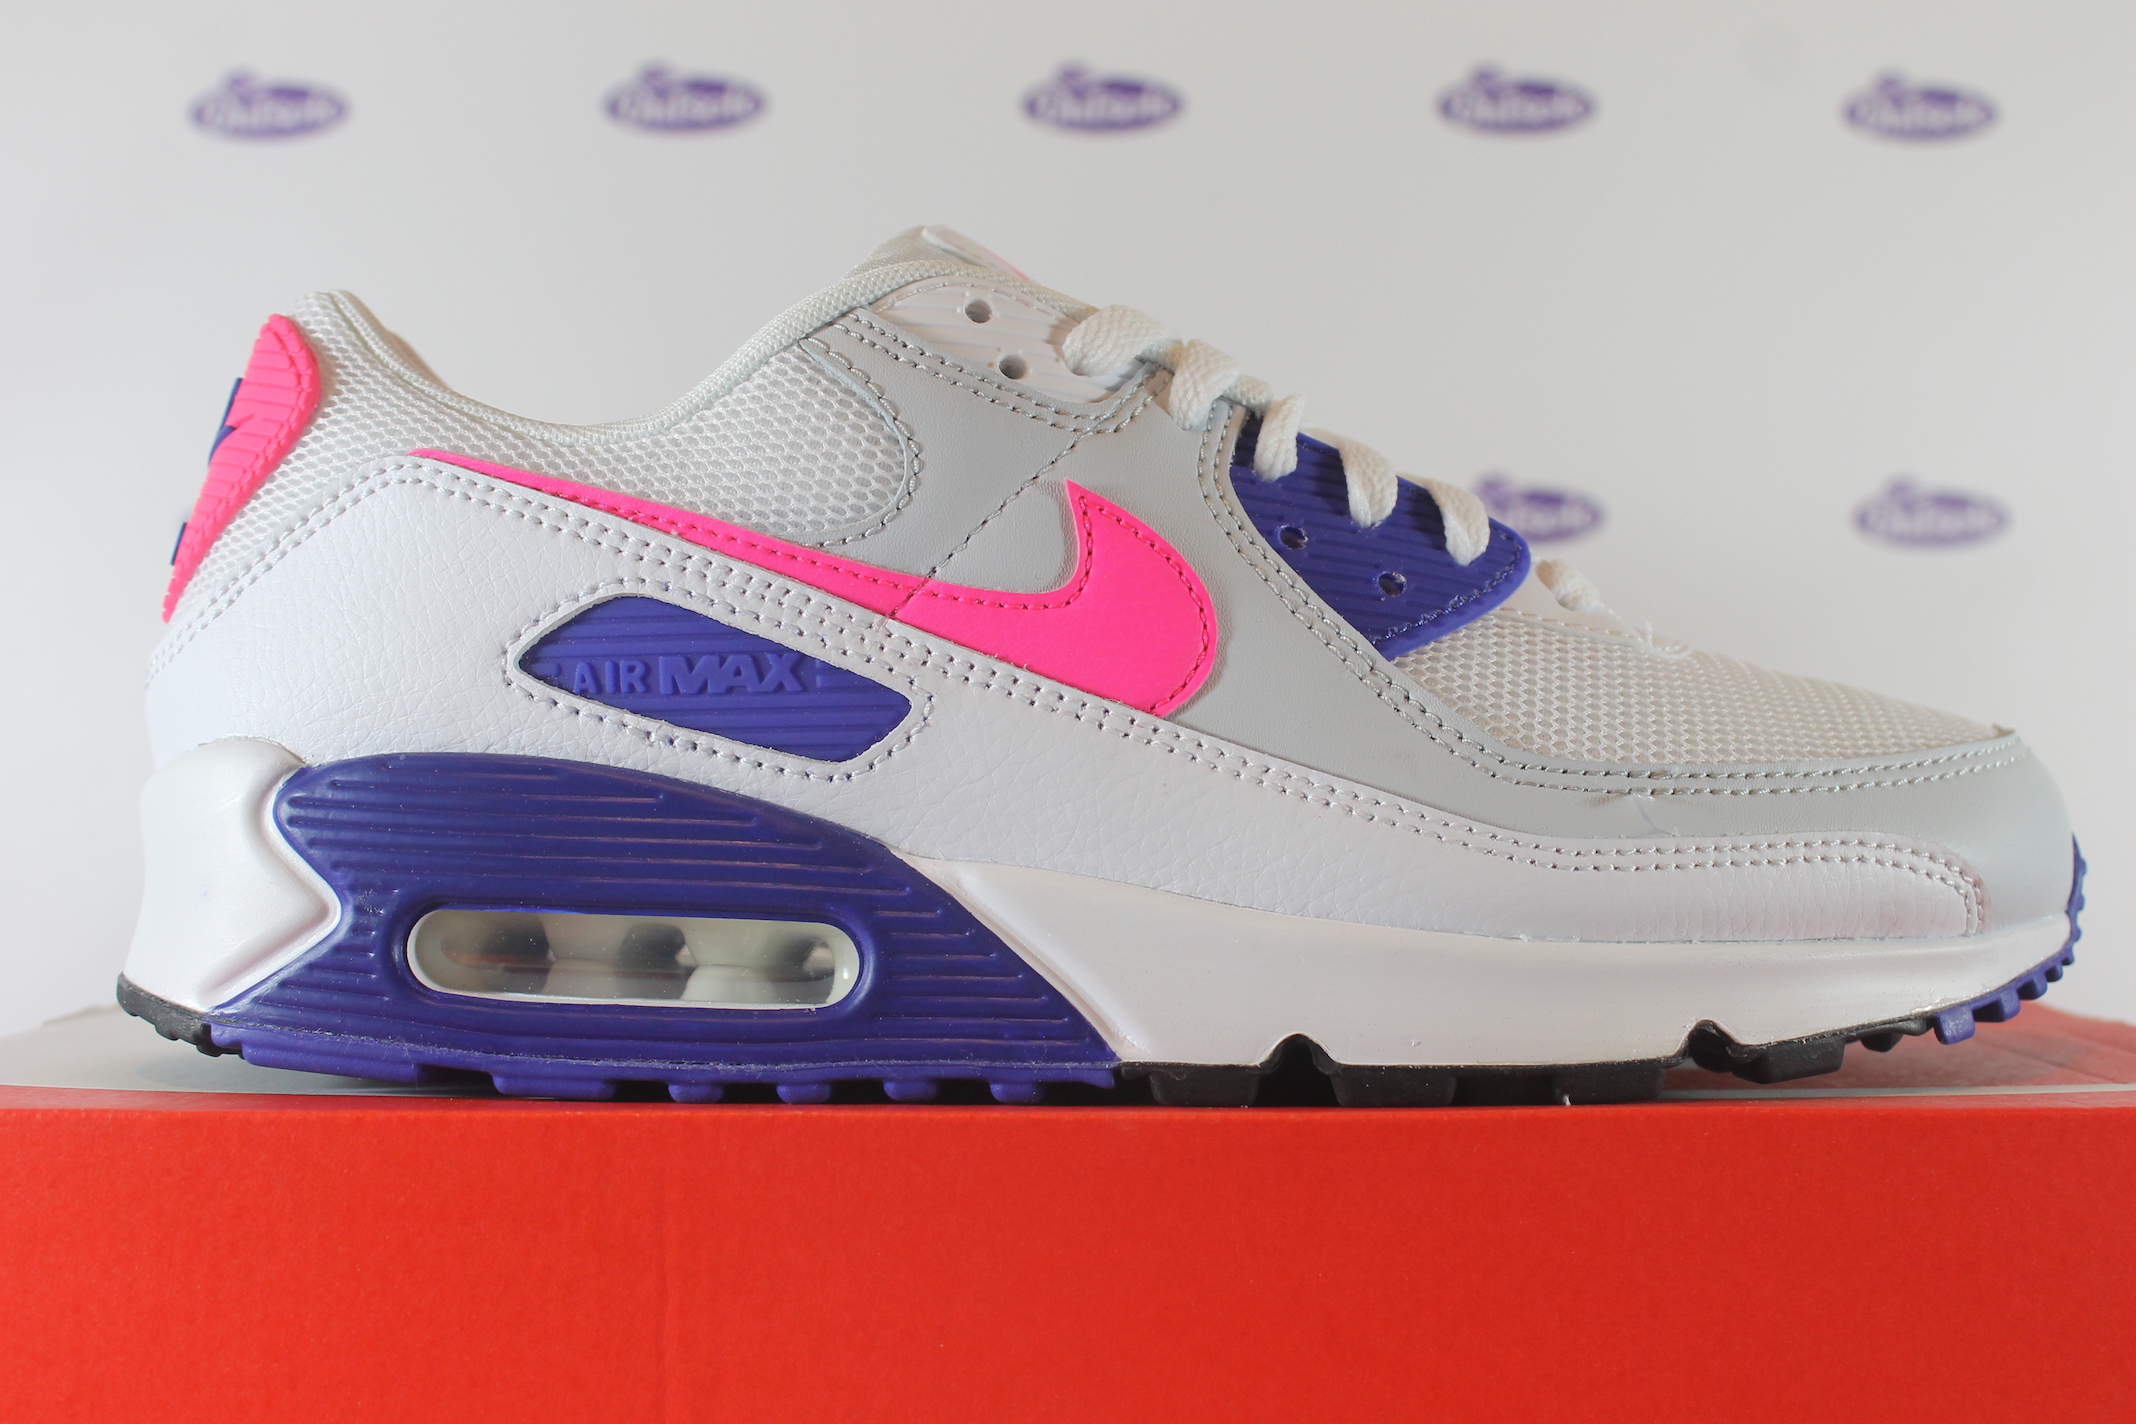 Nike Air Max 90 Hyper Pink • In stock at Outsole